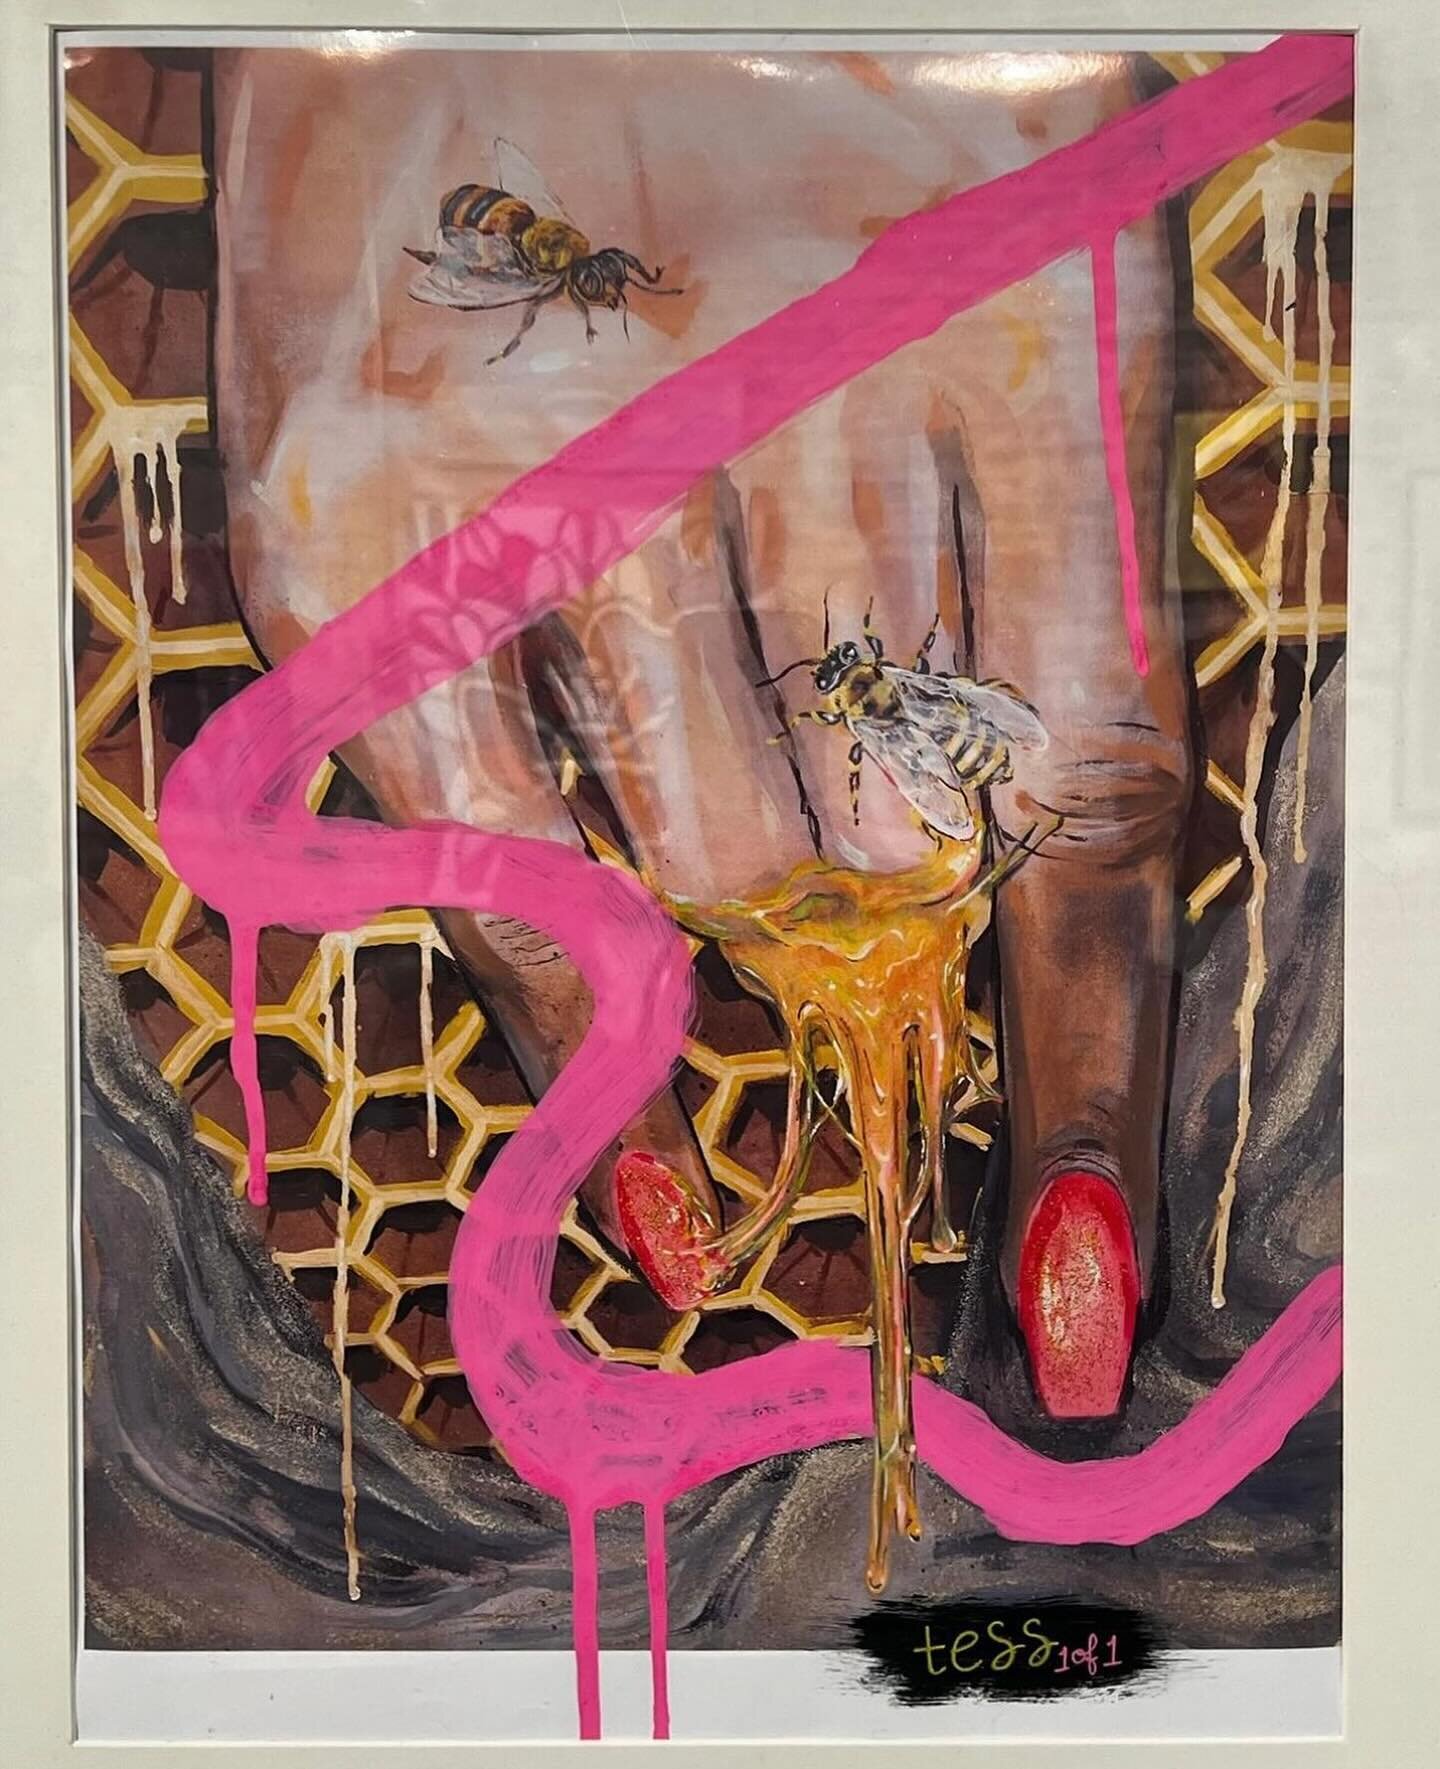 🔴SOLD‼️

🎉Congratulations @handoftess &amp; buyer!

Queen Bee, 2024
Artist: Tess Parker
1/1 Hand embellished print on photo paper, framed

Still lots of great art available to purchase!👀

👑 LET HER REIGN | Open until March 29 
An all-star lineup 